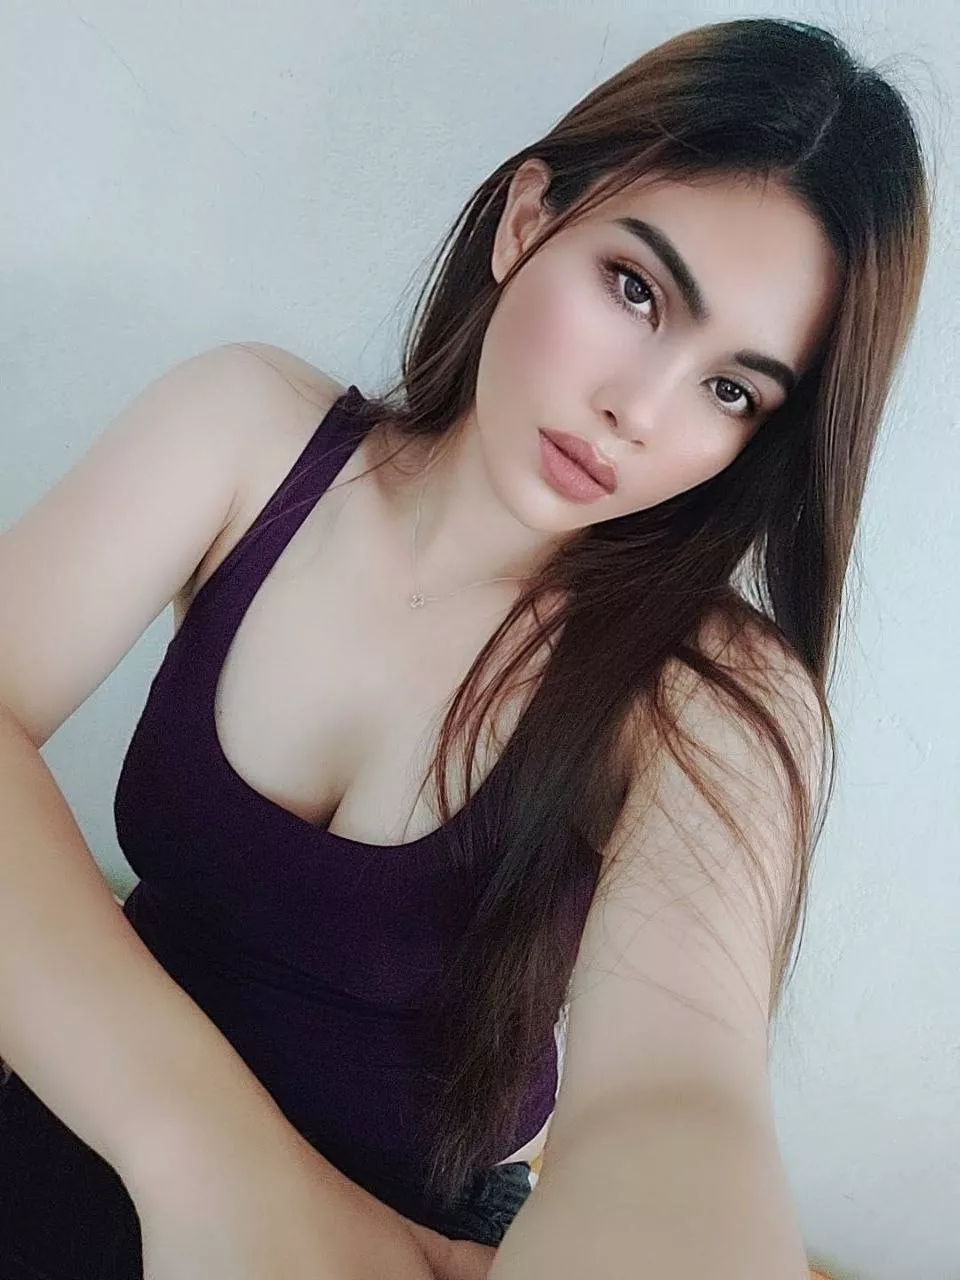 Busty asian mom nudes by May_Villa1